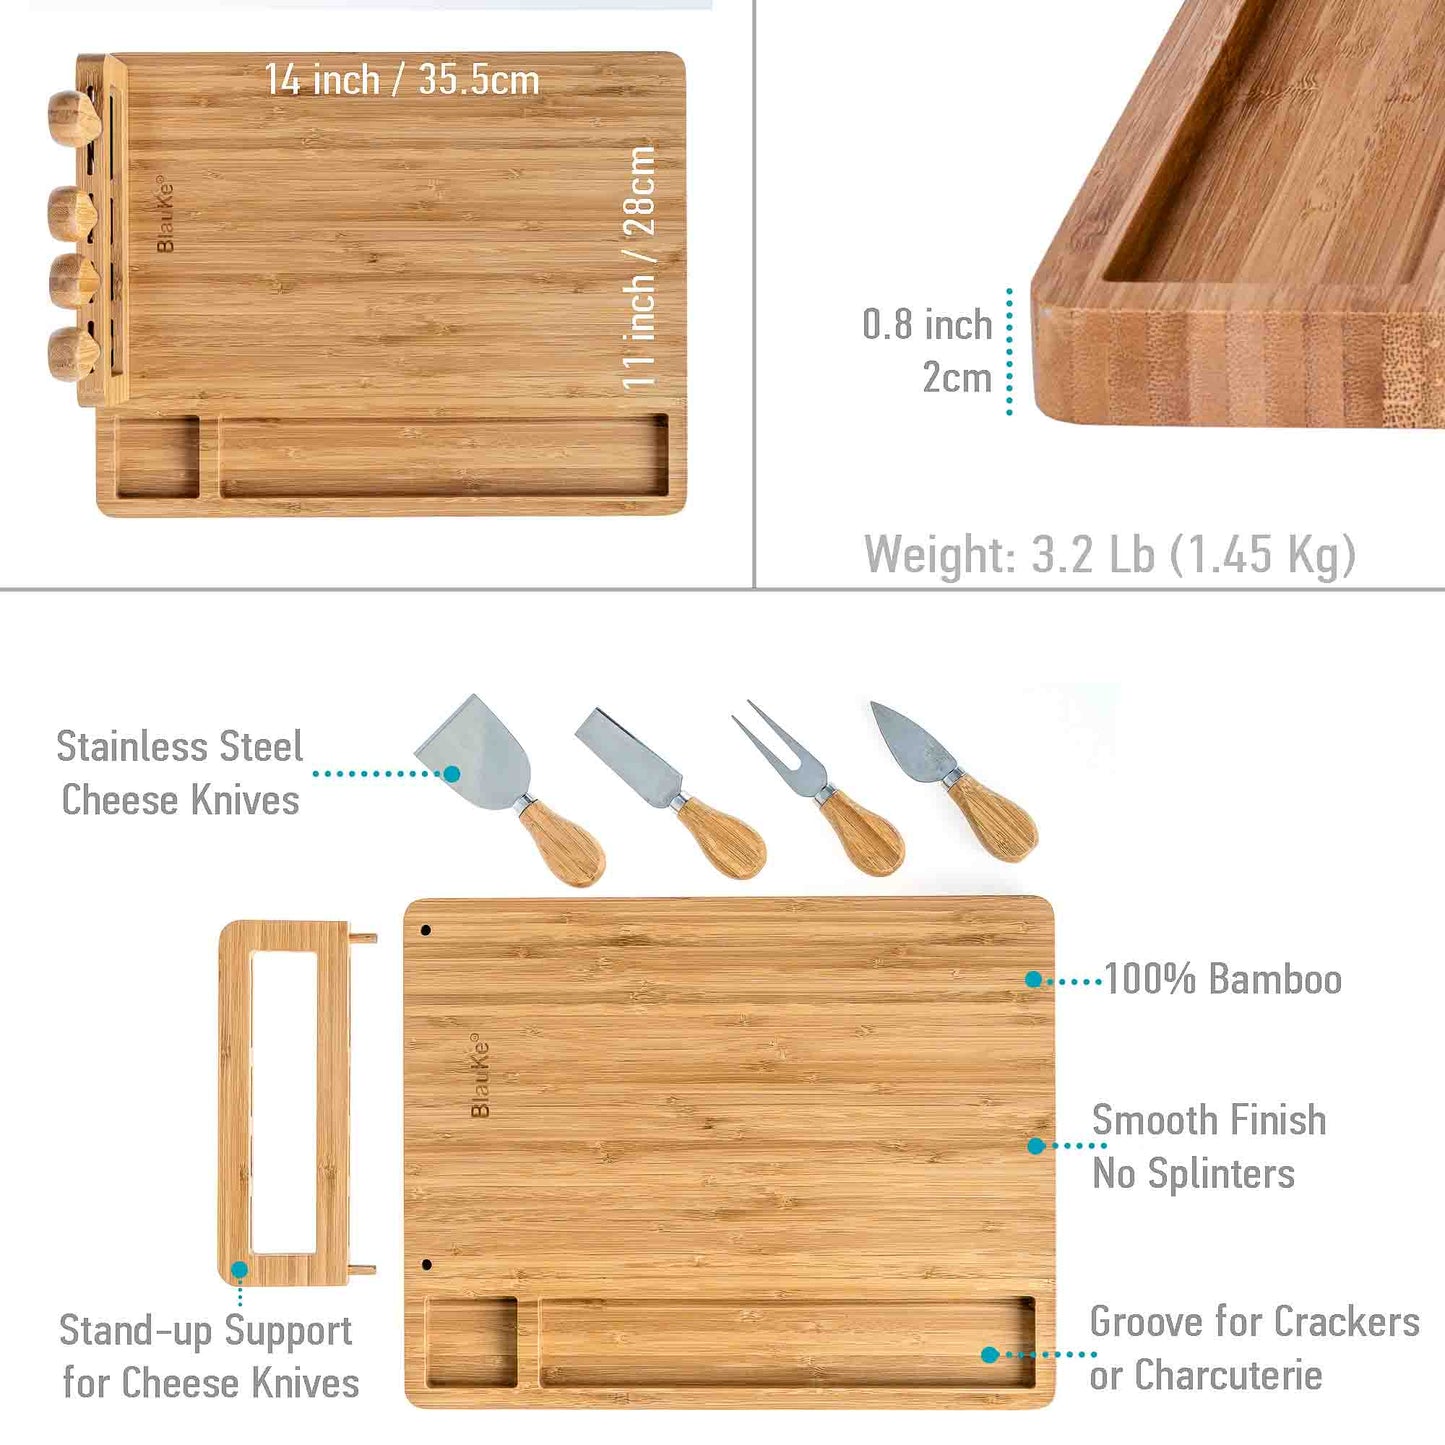 Bamboo Cheese Board and Knife Set - 14x11 inch Charcuterie Board with 4 Cheese Knives - Wood Serving Tray-2